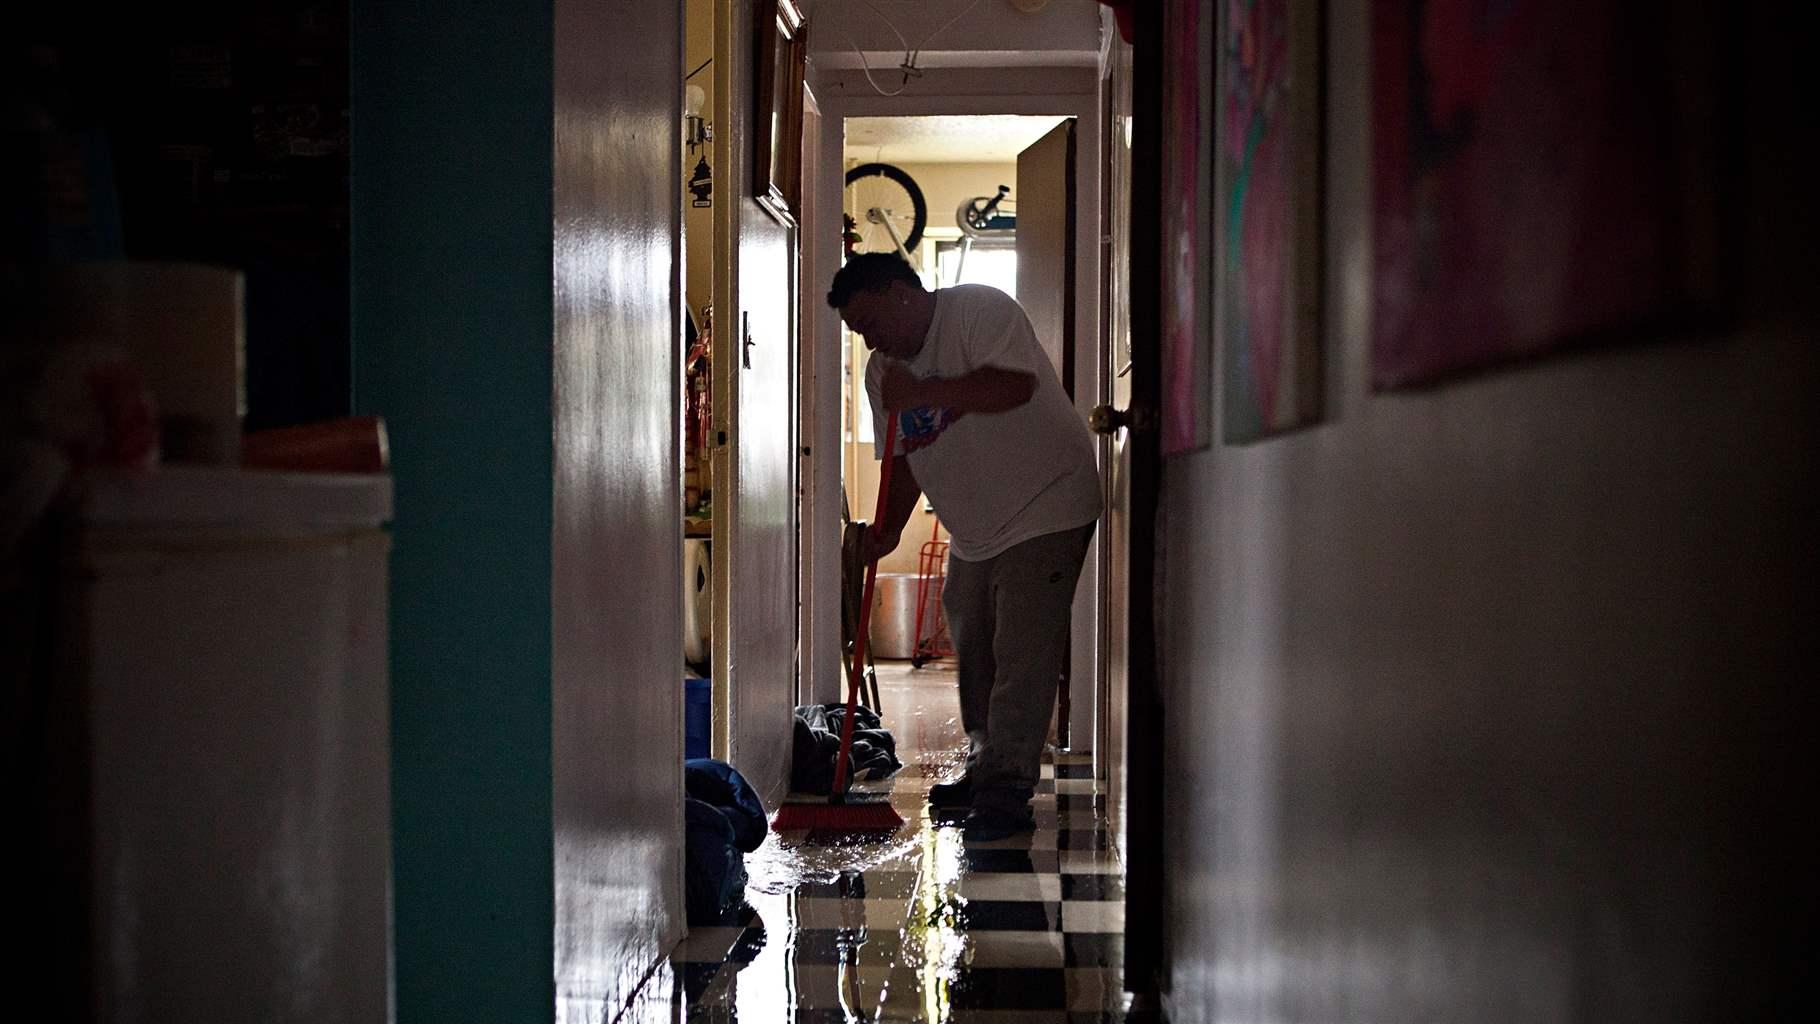 Bernadino Cruz sweeps water out of his apartment while cleaning up after flooding caused by Hurricane Sandy on October 30, 2012, in the Lower East Side of New York, United States